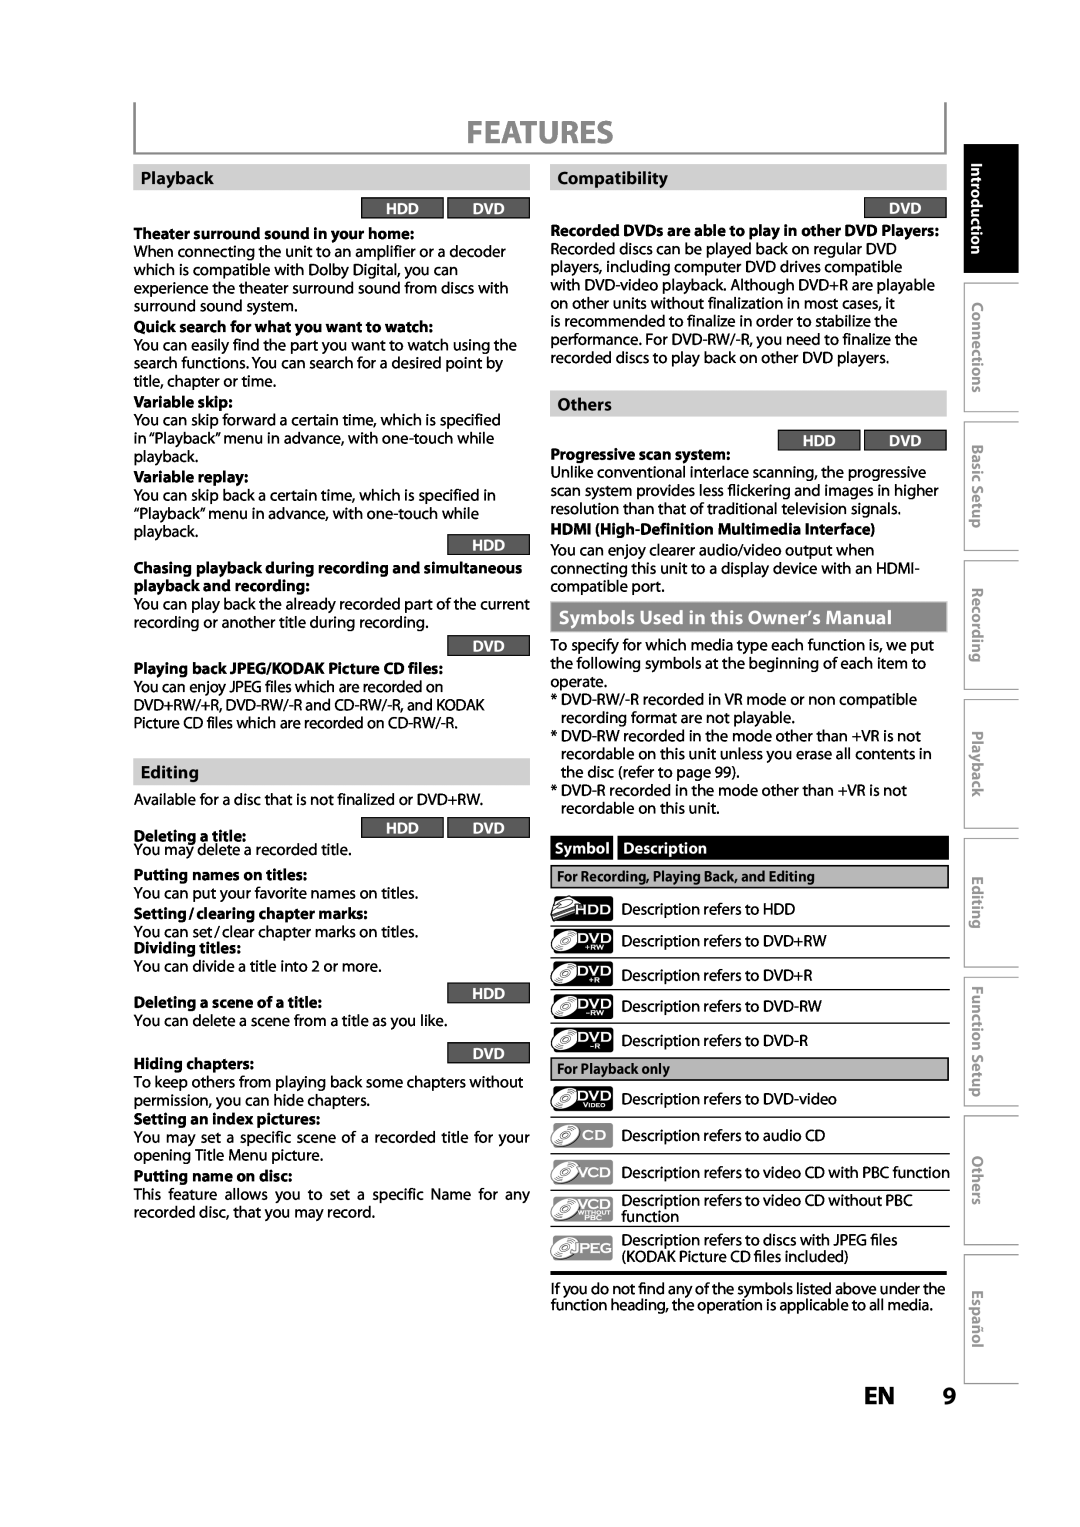 Magnavox MDR533H Features, Symbols Used in this Owner’s Manual, Playback, Editing, Compatibility, Others, Hdd Dvd, Español 